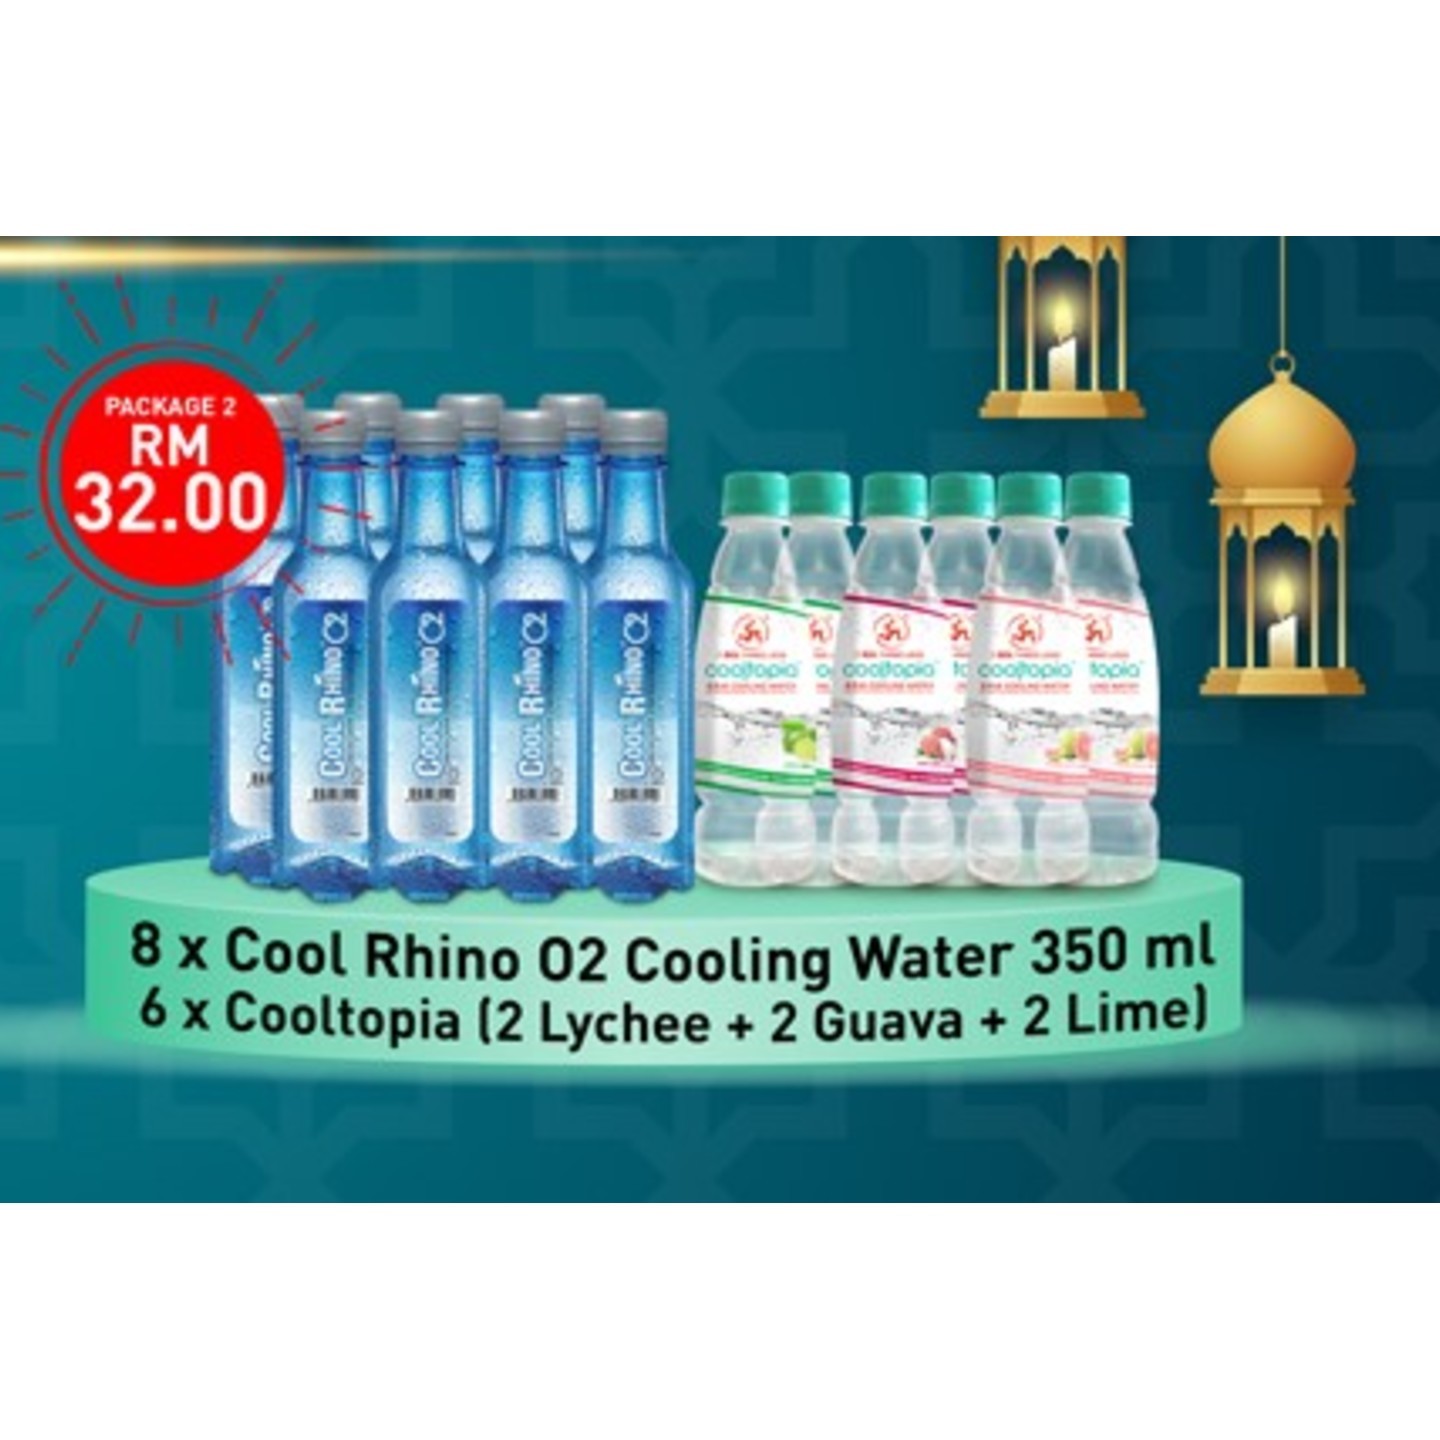 RAYA DEAL PACKAGE 2: COOL RHINO O2 COOLING WATER 350ML x 8 + COOLTOPIA COOLTOPIA (2 LYCHEE, 2 GUAVA, 2 LIME) 320ML X 6